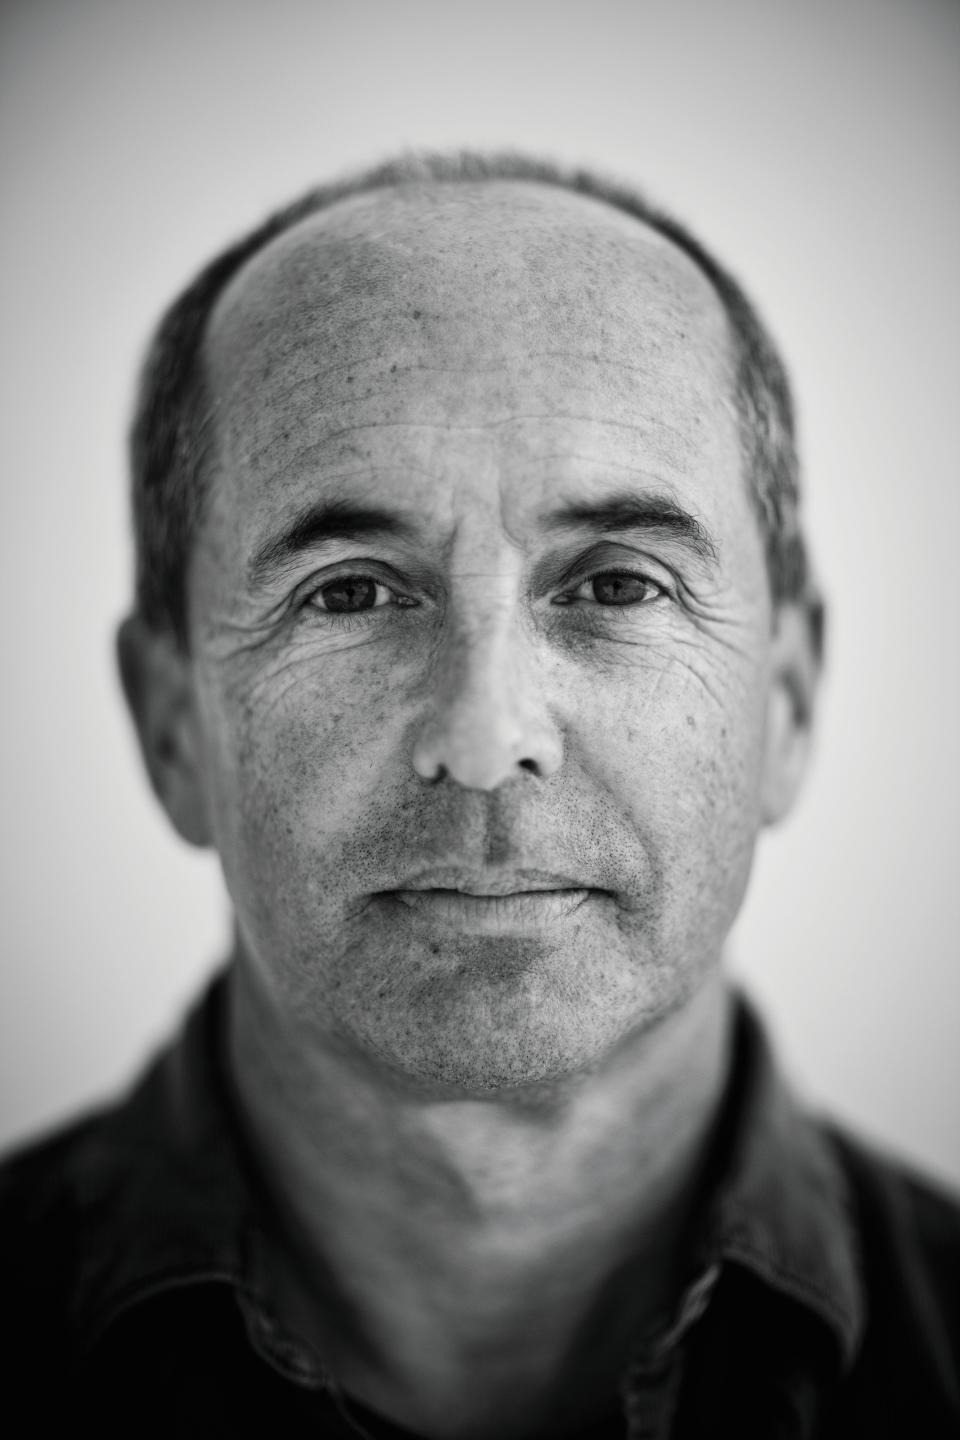 Author Don Winslow, whose new book "City on Fire" was published April 26, 2022.